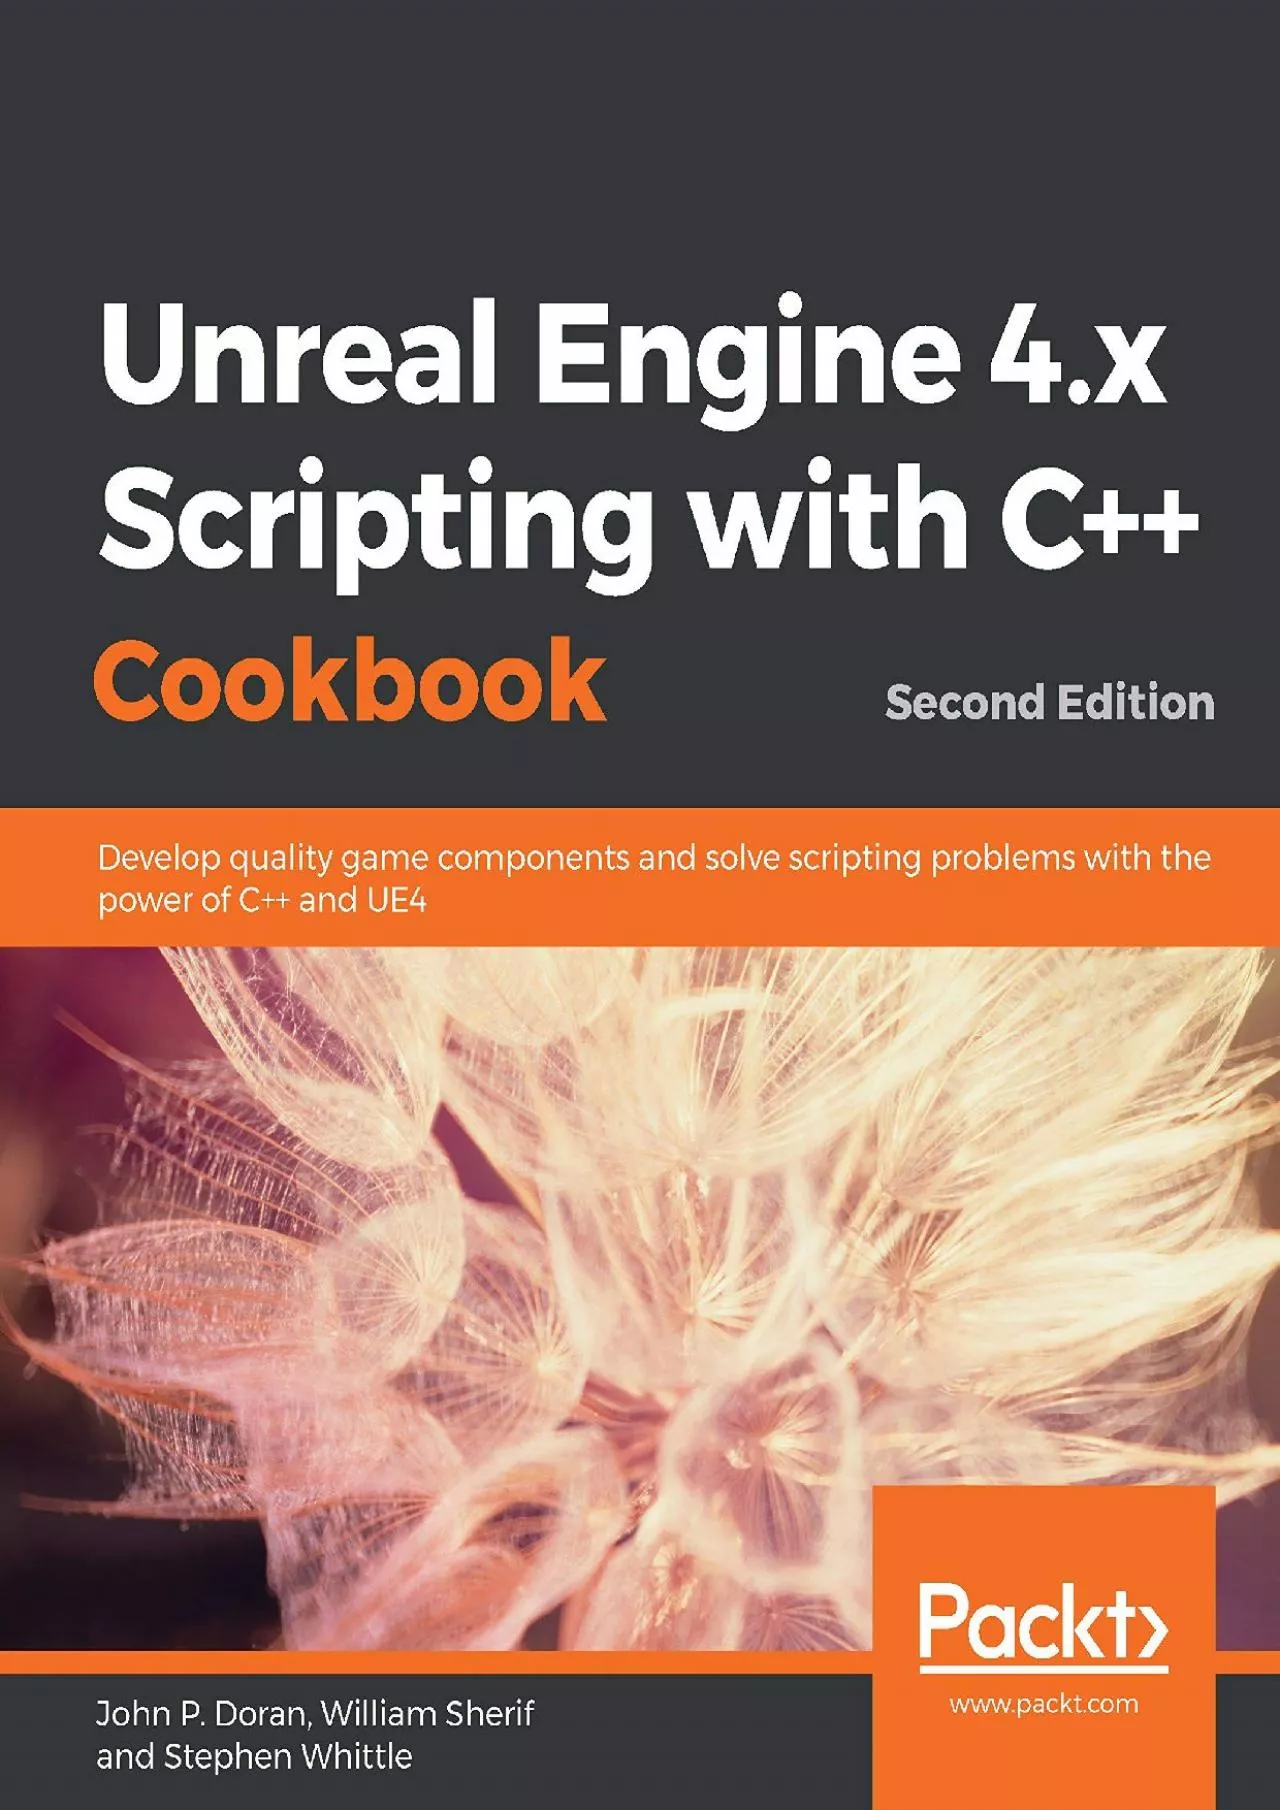 [BEST]-Unreal Engine 4.x Scripting with C++ Cookbook: Develop quality game components